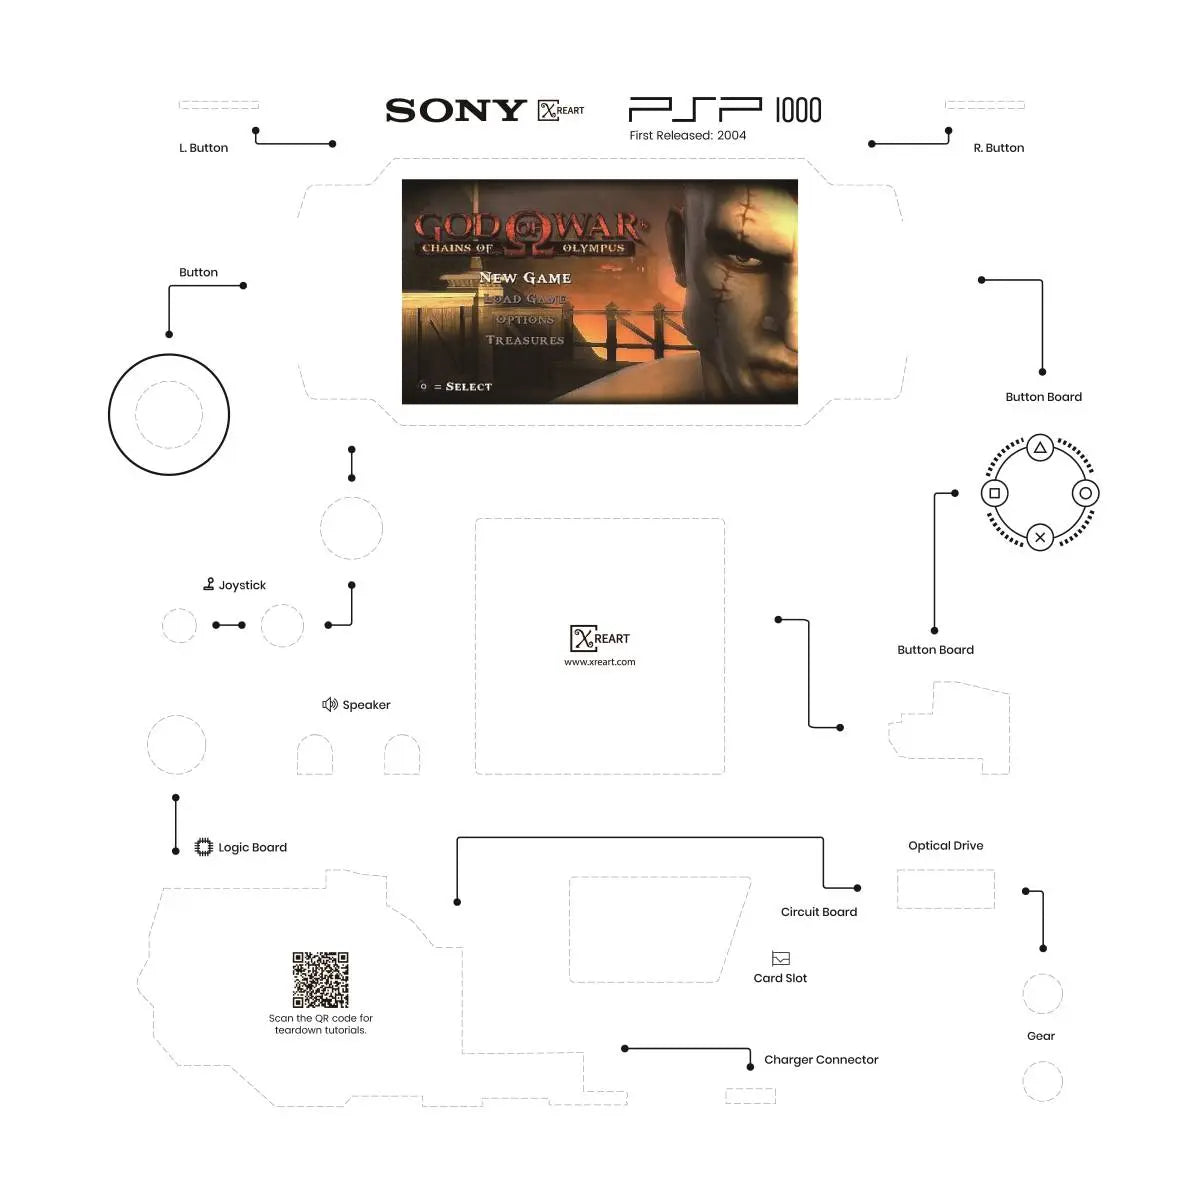 SONY PlayStation Portable (PSP) Layout PDF Download - XreArt